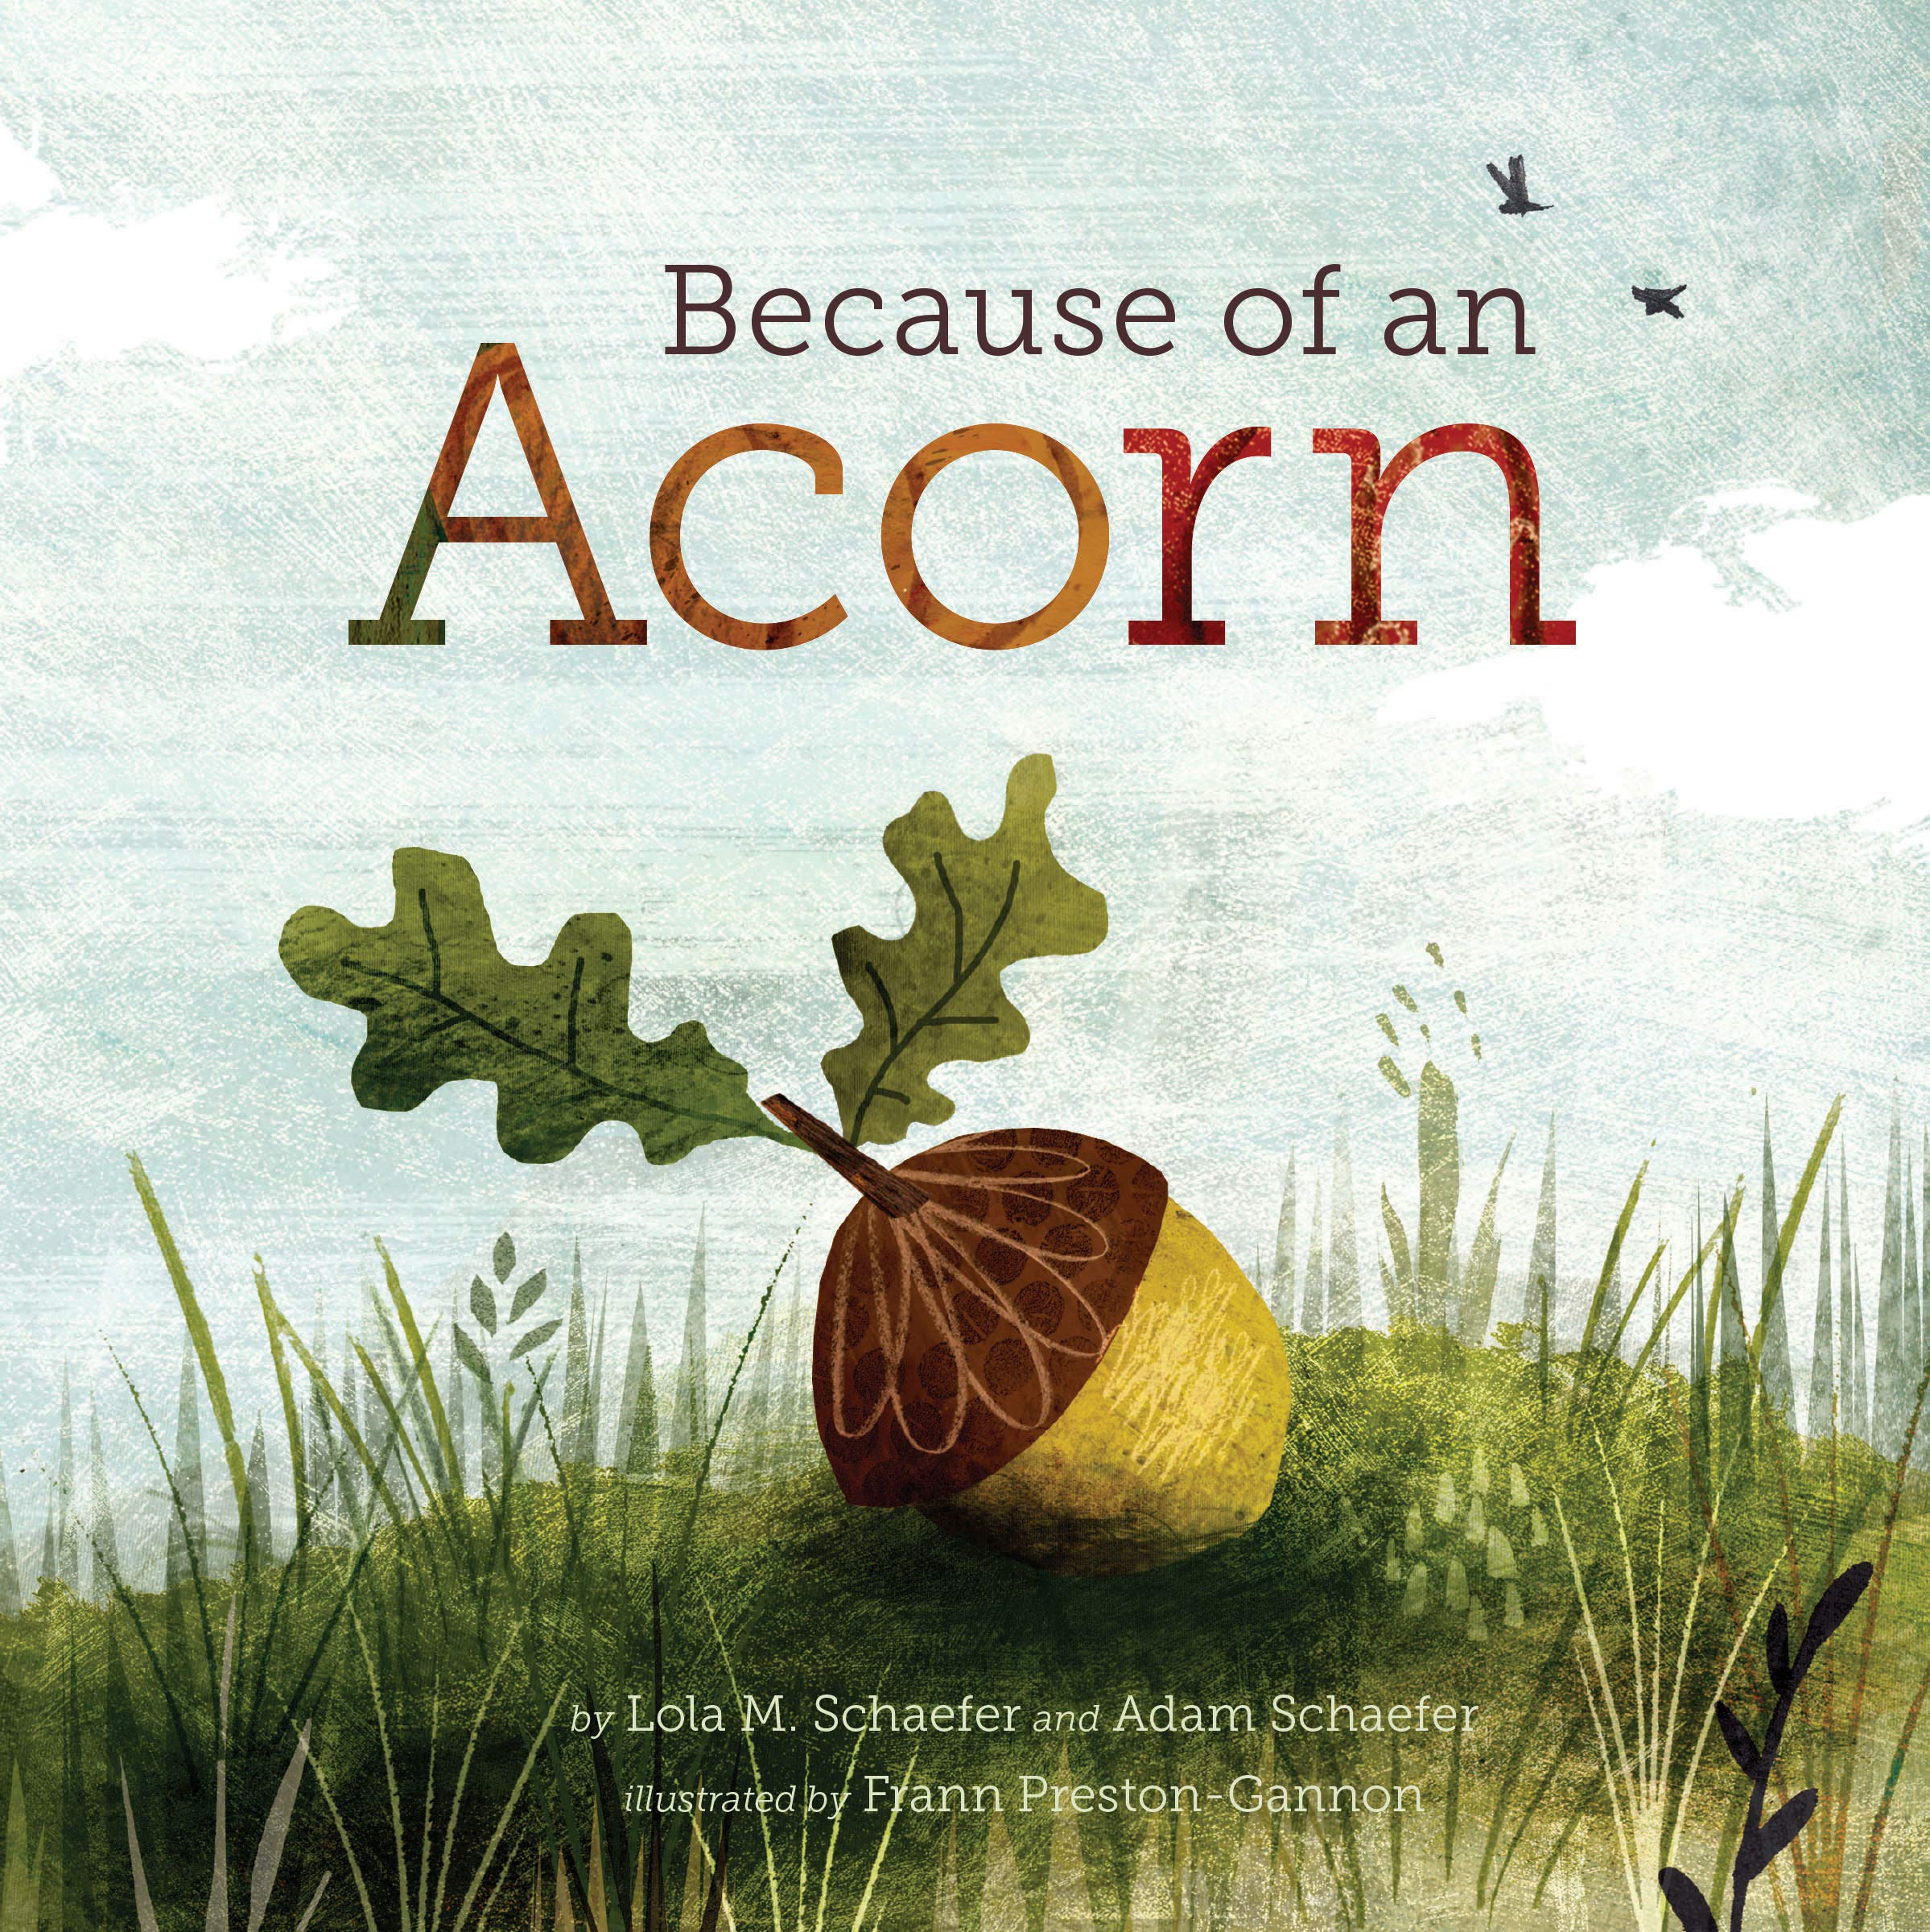 speech and language teaching concepts for Because of an Acorn in speech therapy​ ​